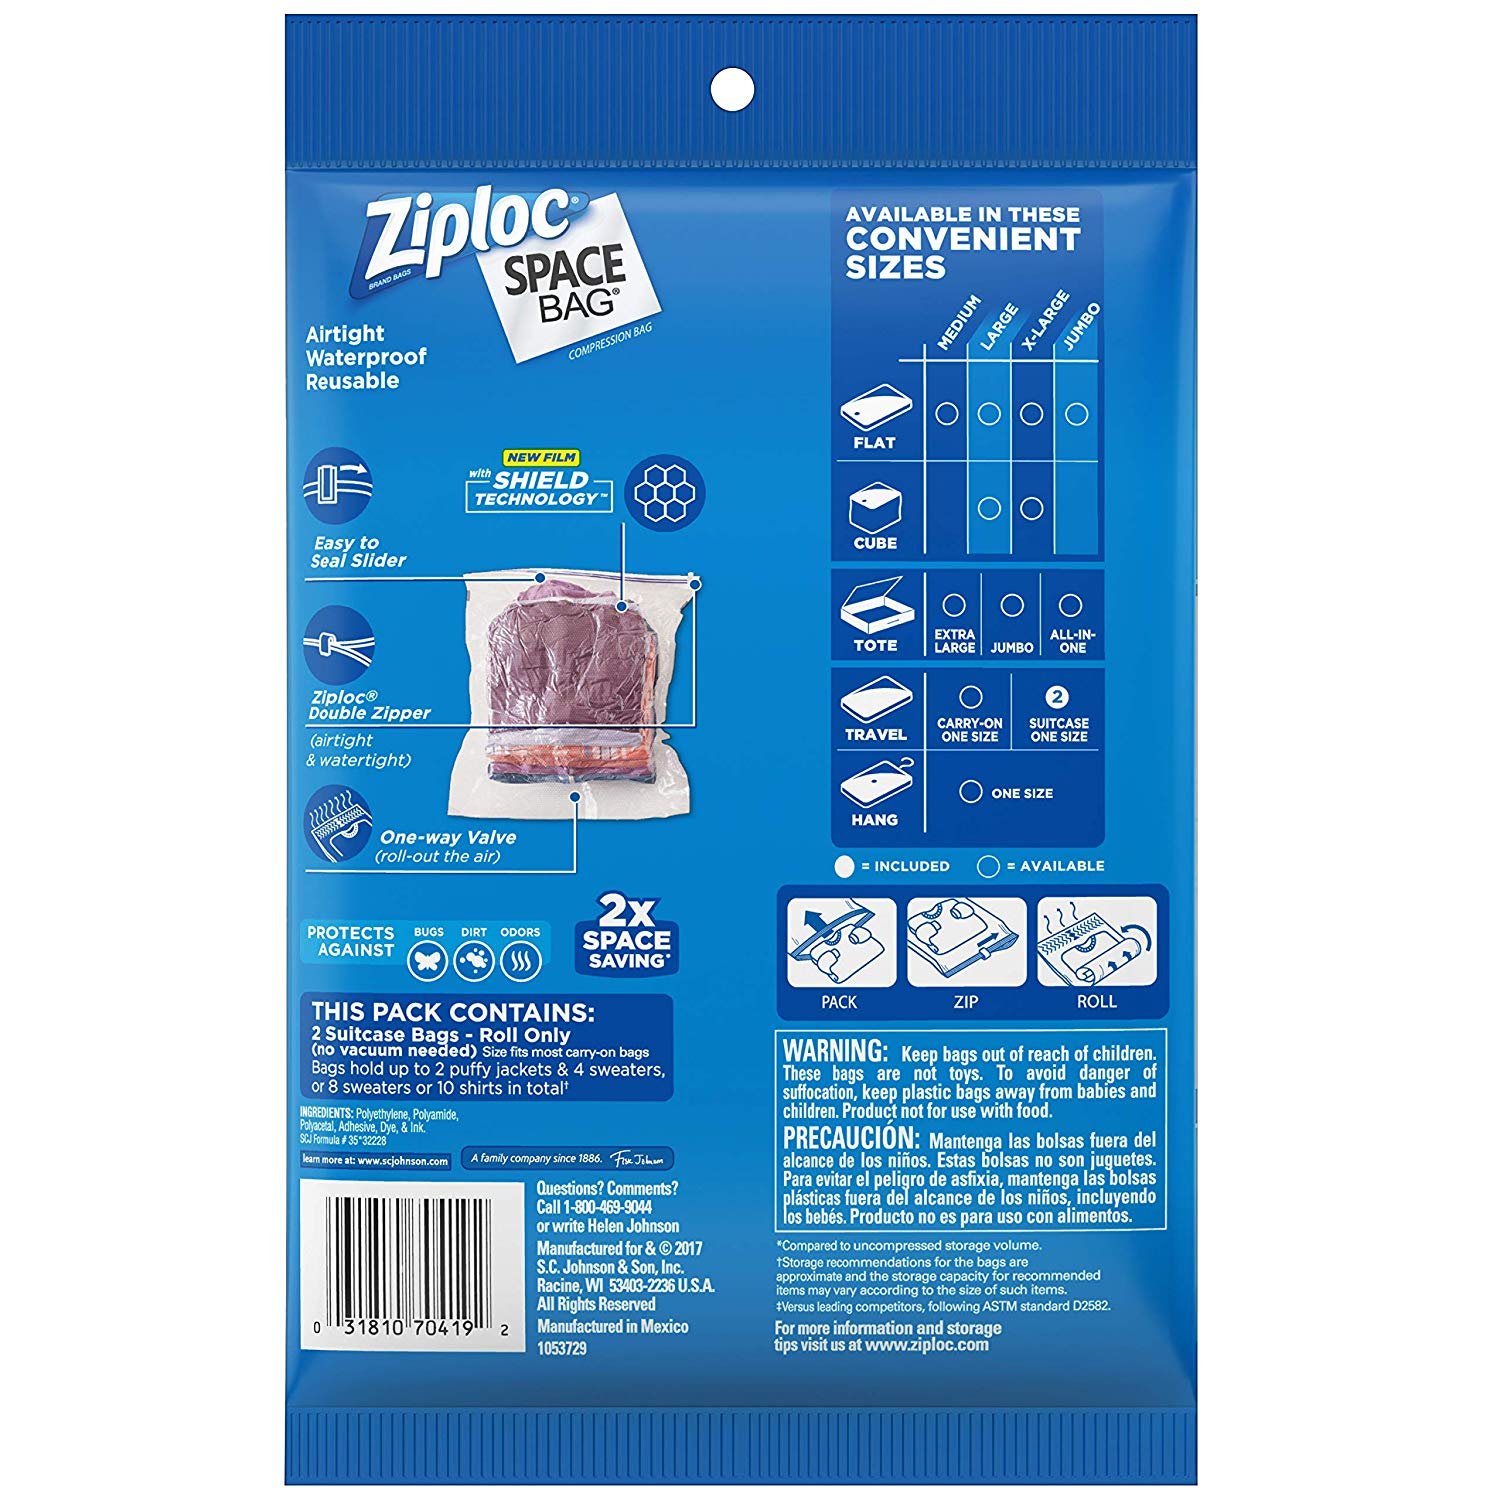 Ziploc Space Bag, Travel Bags - Poly Pack, 1 Pack - image 2 of 5